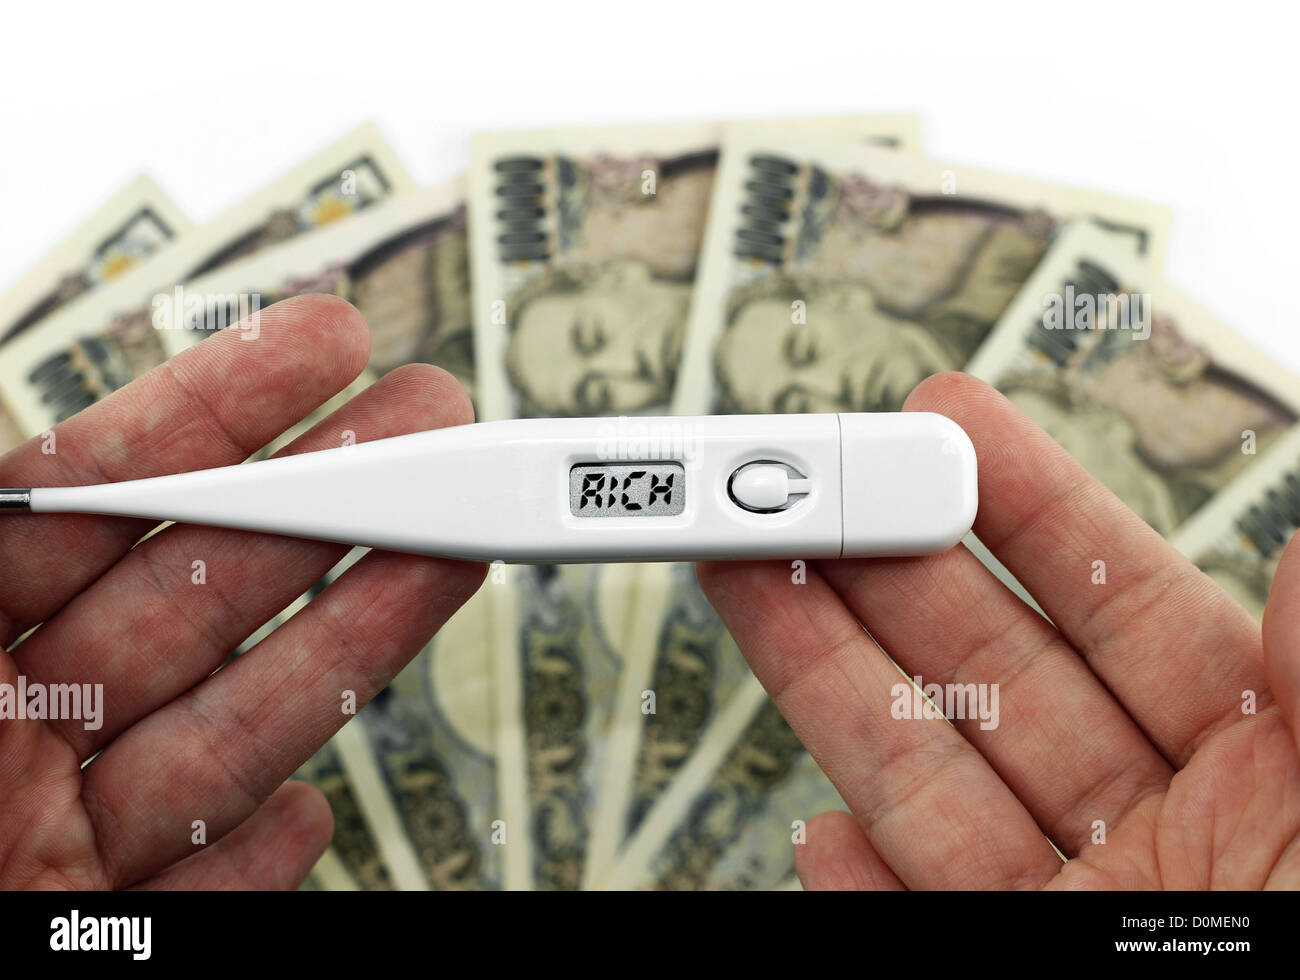 Money concept: hand holding thermometer that shows rich instead of temperature, with money in the background Stock Photo